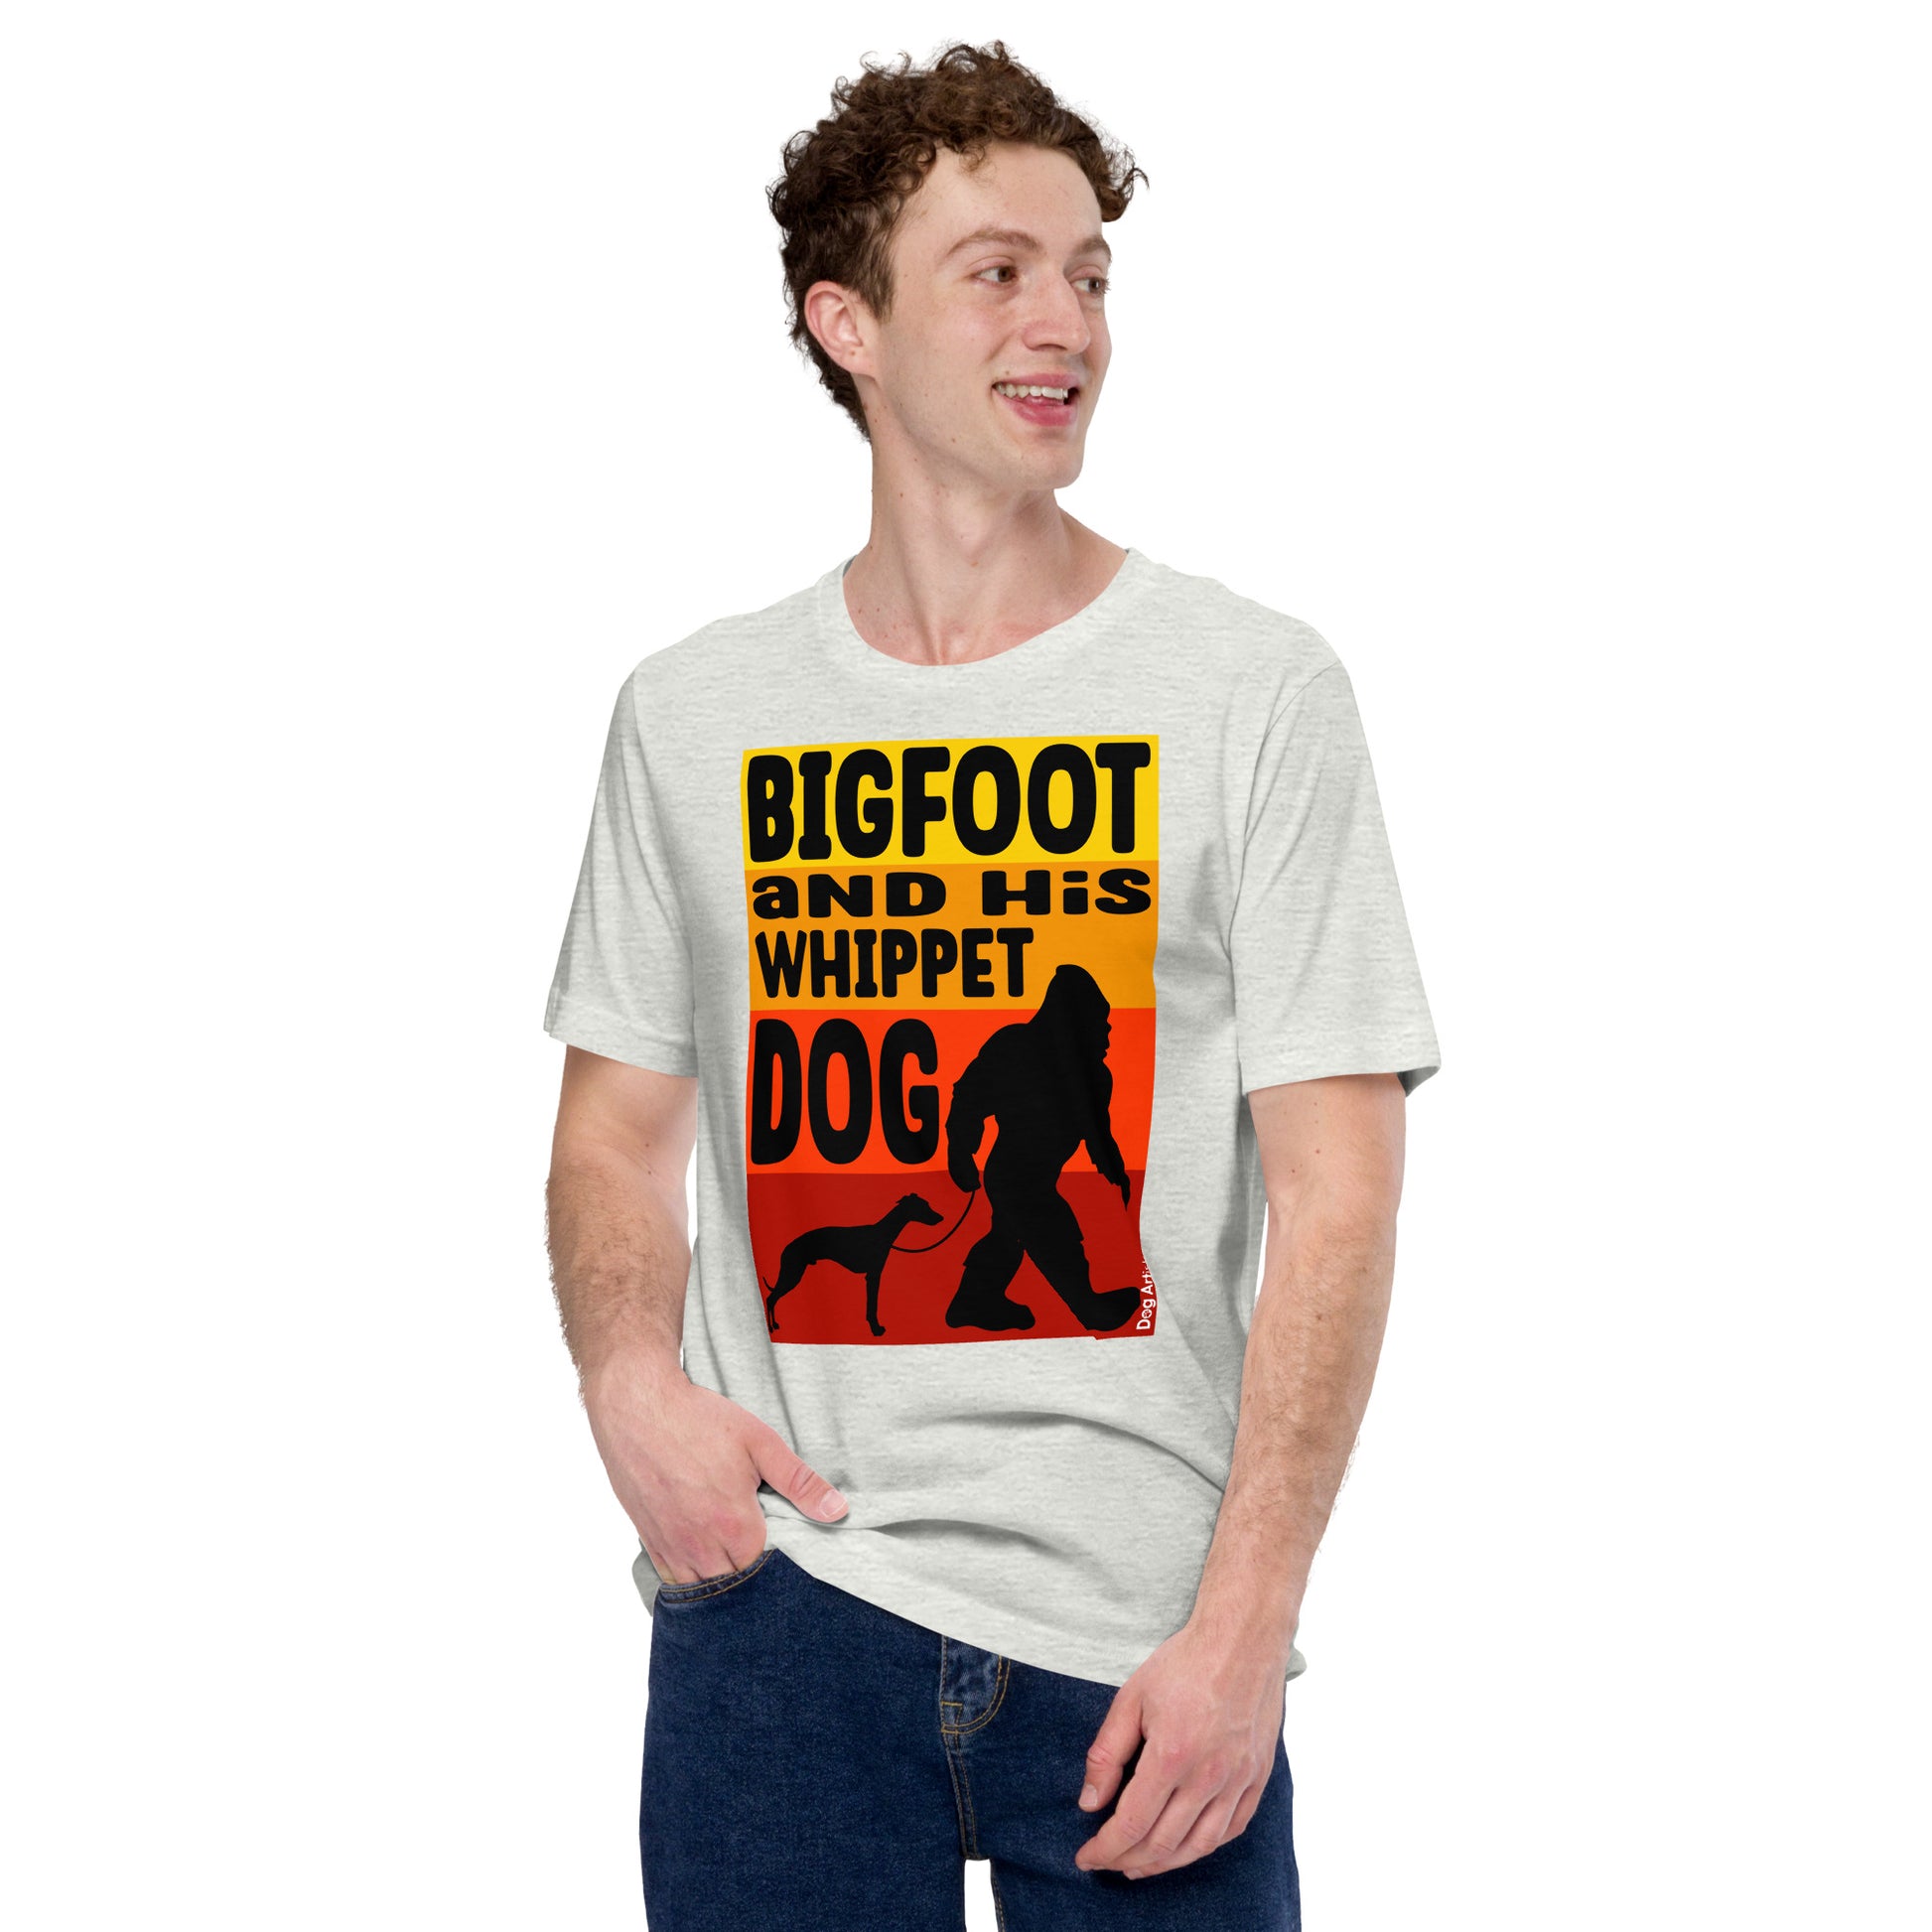 Bigfoot and his Whippet dog unisex ash t-shirt by Dog Artistry.